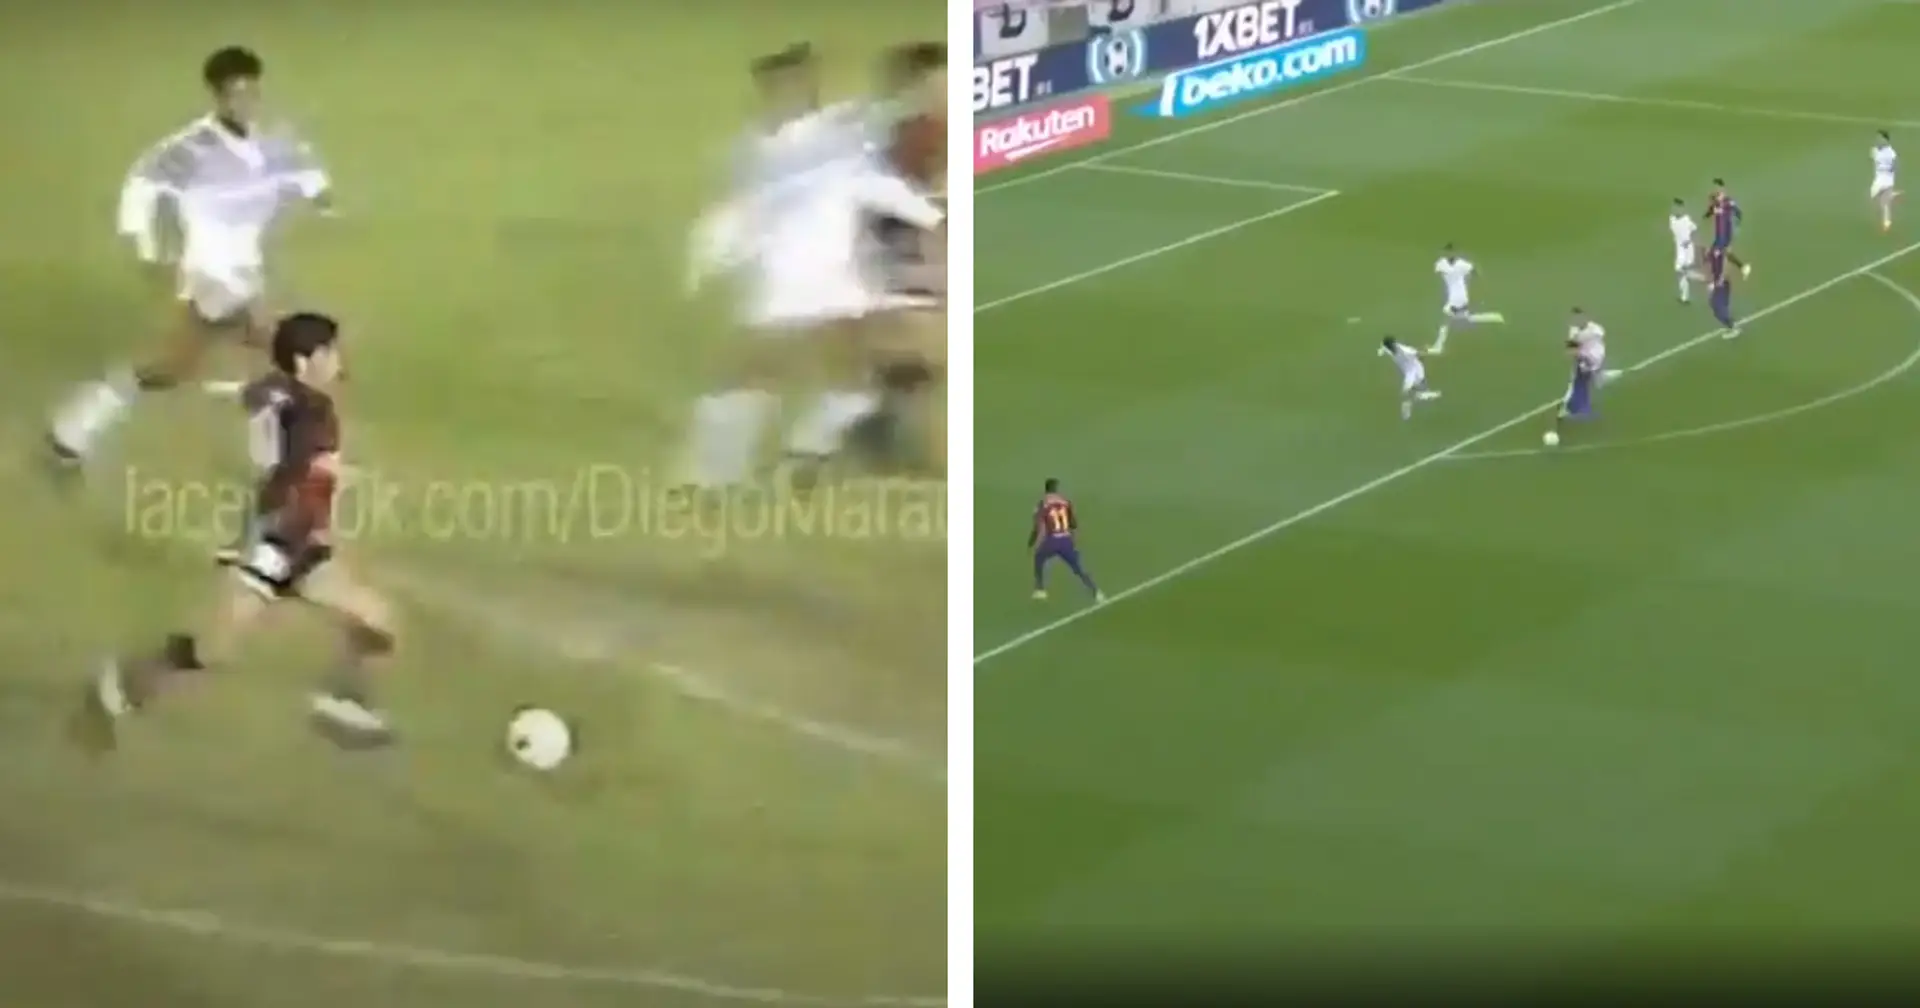 Tribute done right: Messi's goal vs Osasuna incredibly similar to Maradona's goal for Newell's